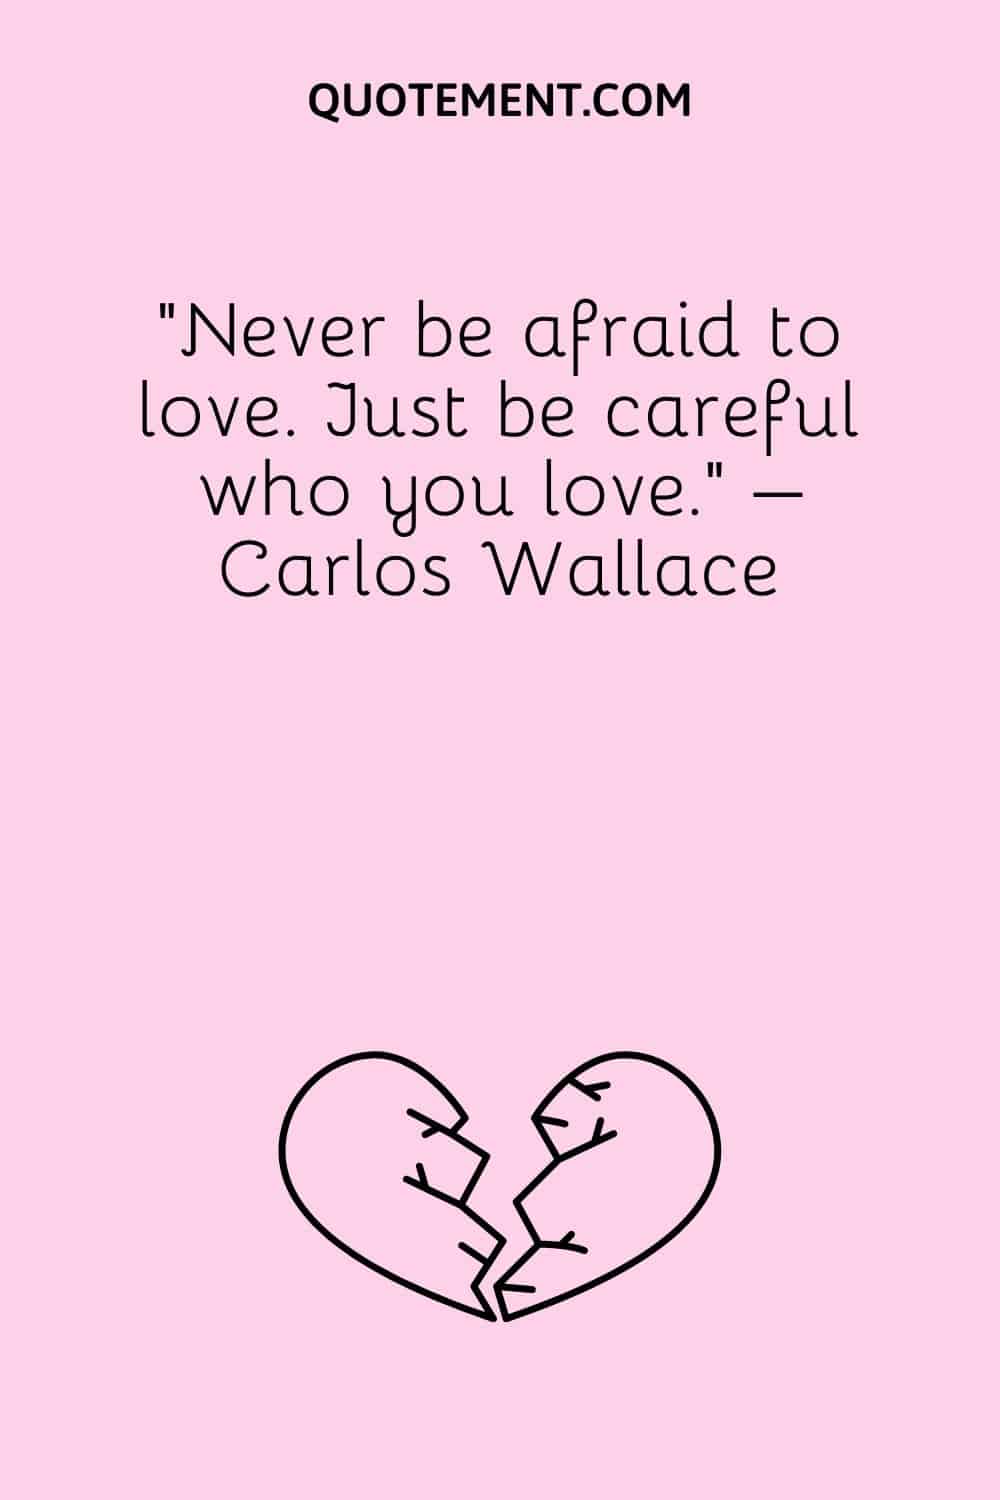 “Never be afraid to love. Just be careful who you love.” – Carlos Wallace